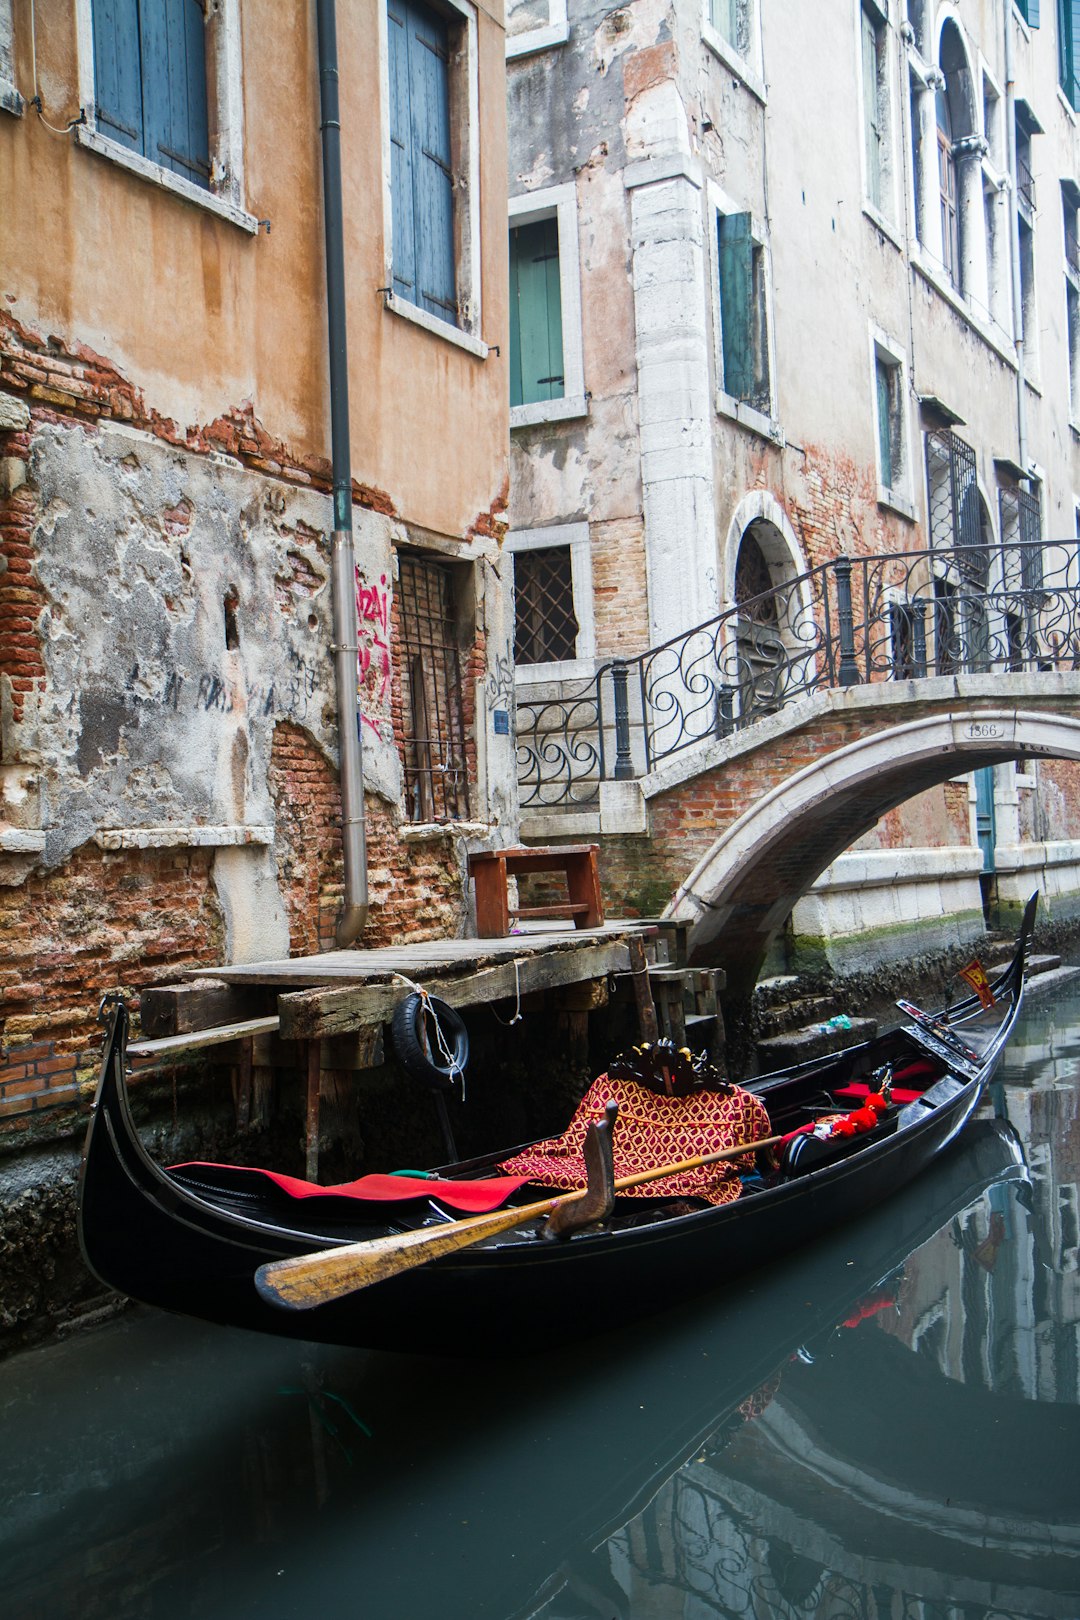 travelers stories about Waterway in Venise, Italy